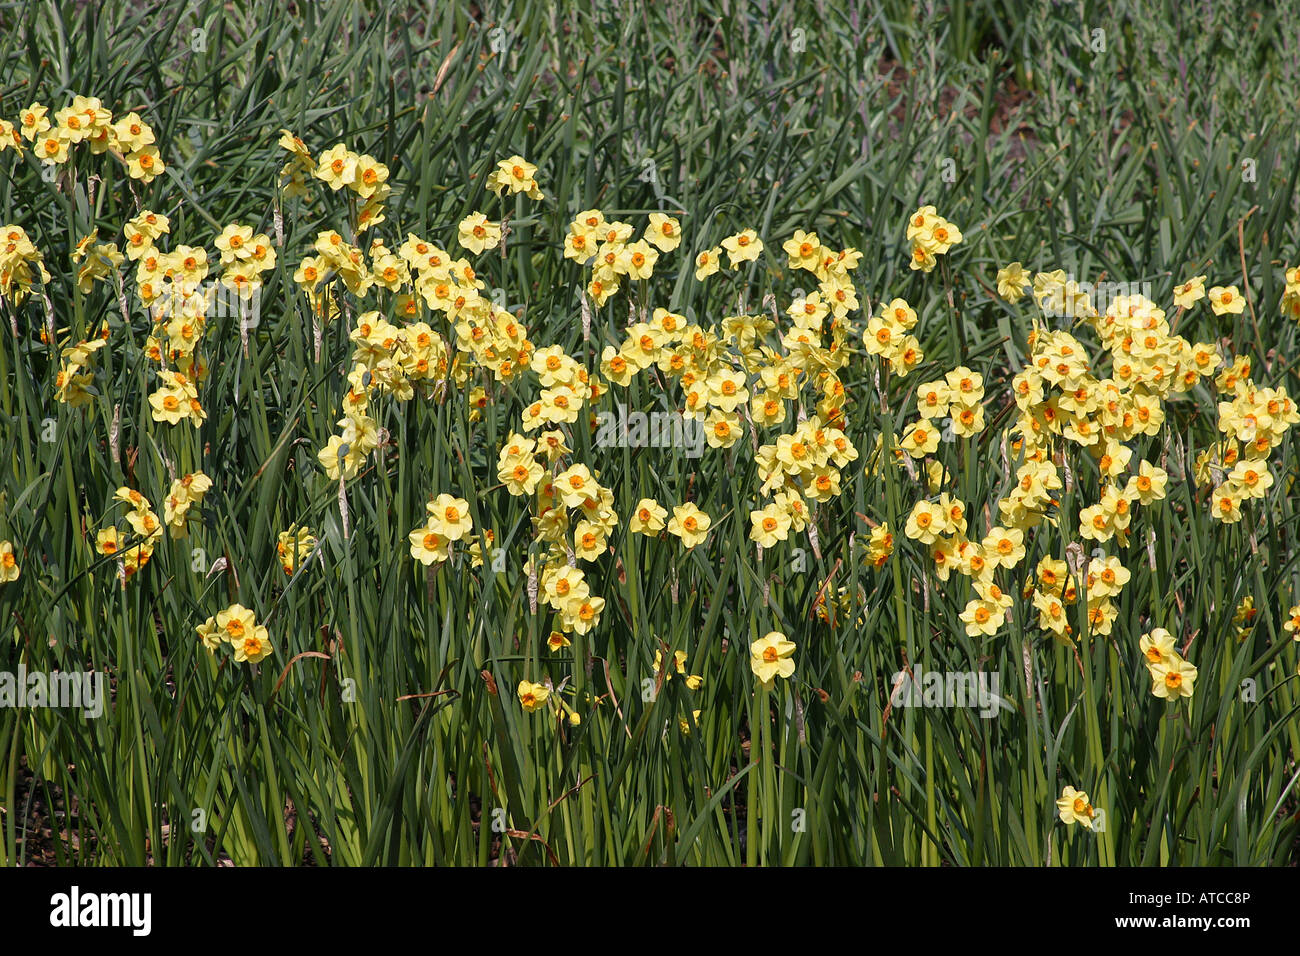 Daffodil flower  daffodils Head on yellow petals St david's day Wales  Jonquille narcisse welsh Daffodils 31281 Stock Photo